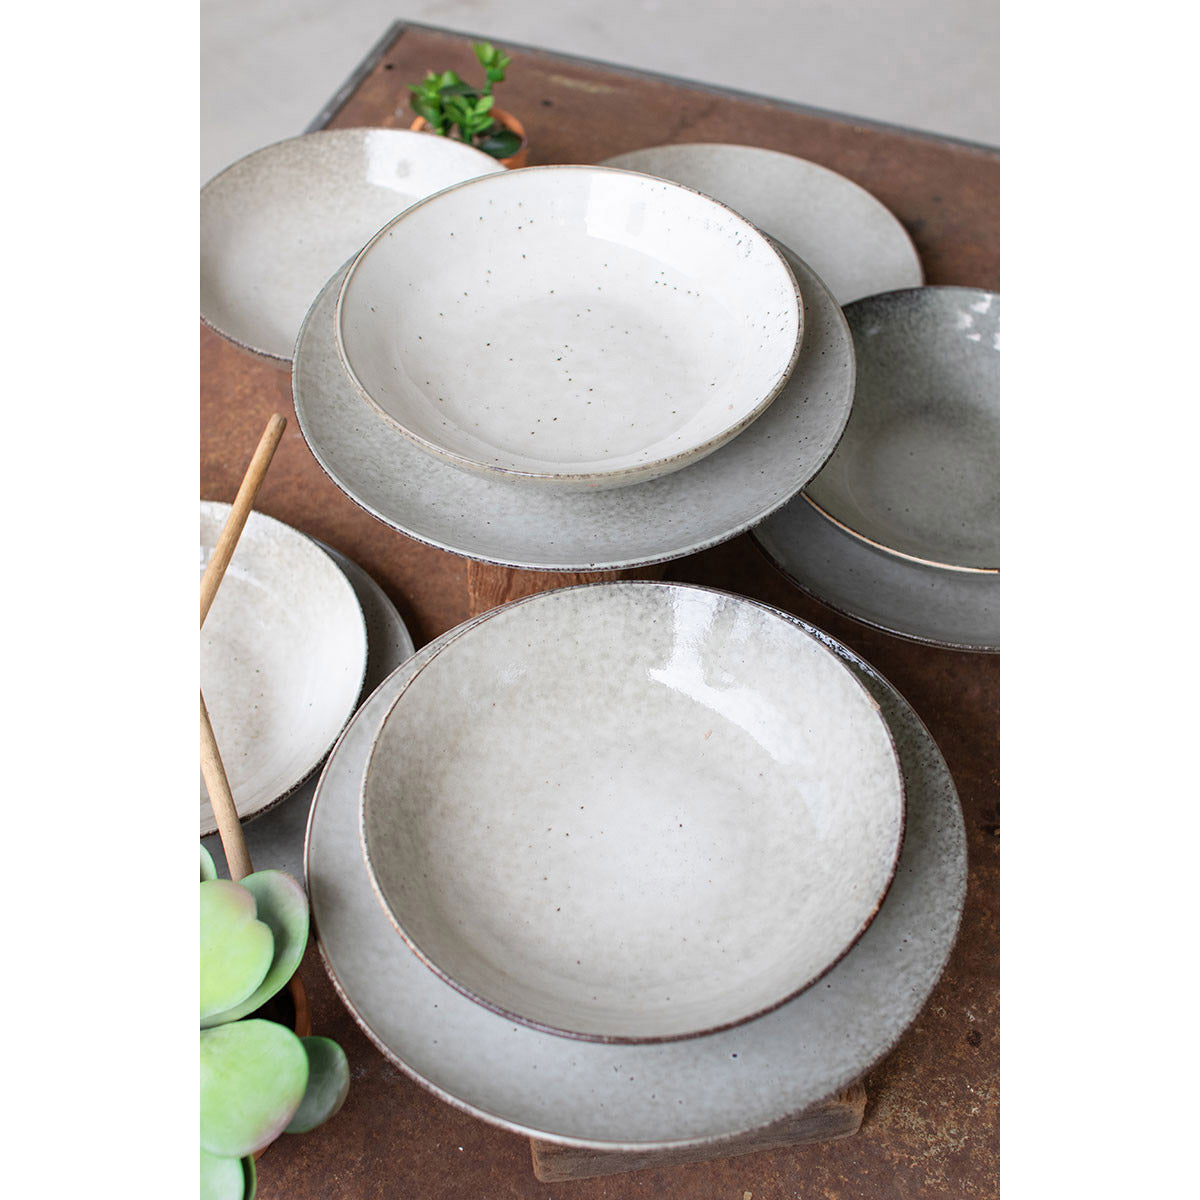 Oatmeal Ceramic Dinner Plate and Bowl - Set of 2